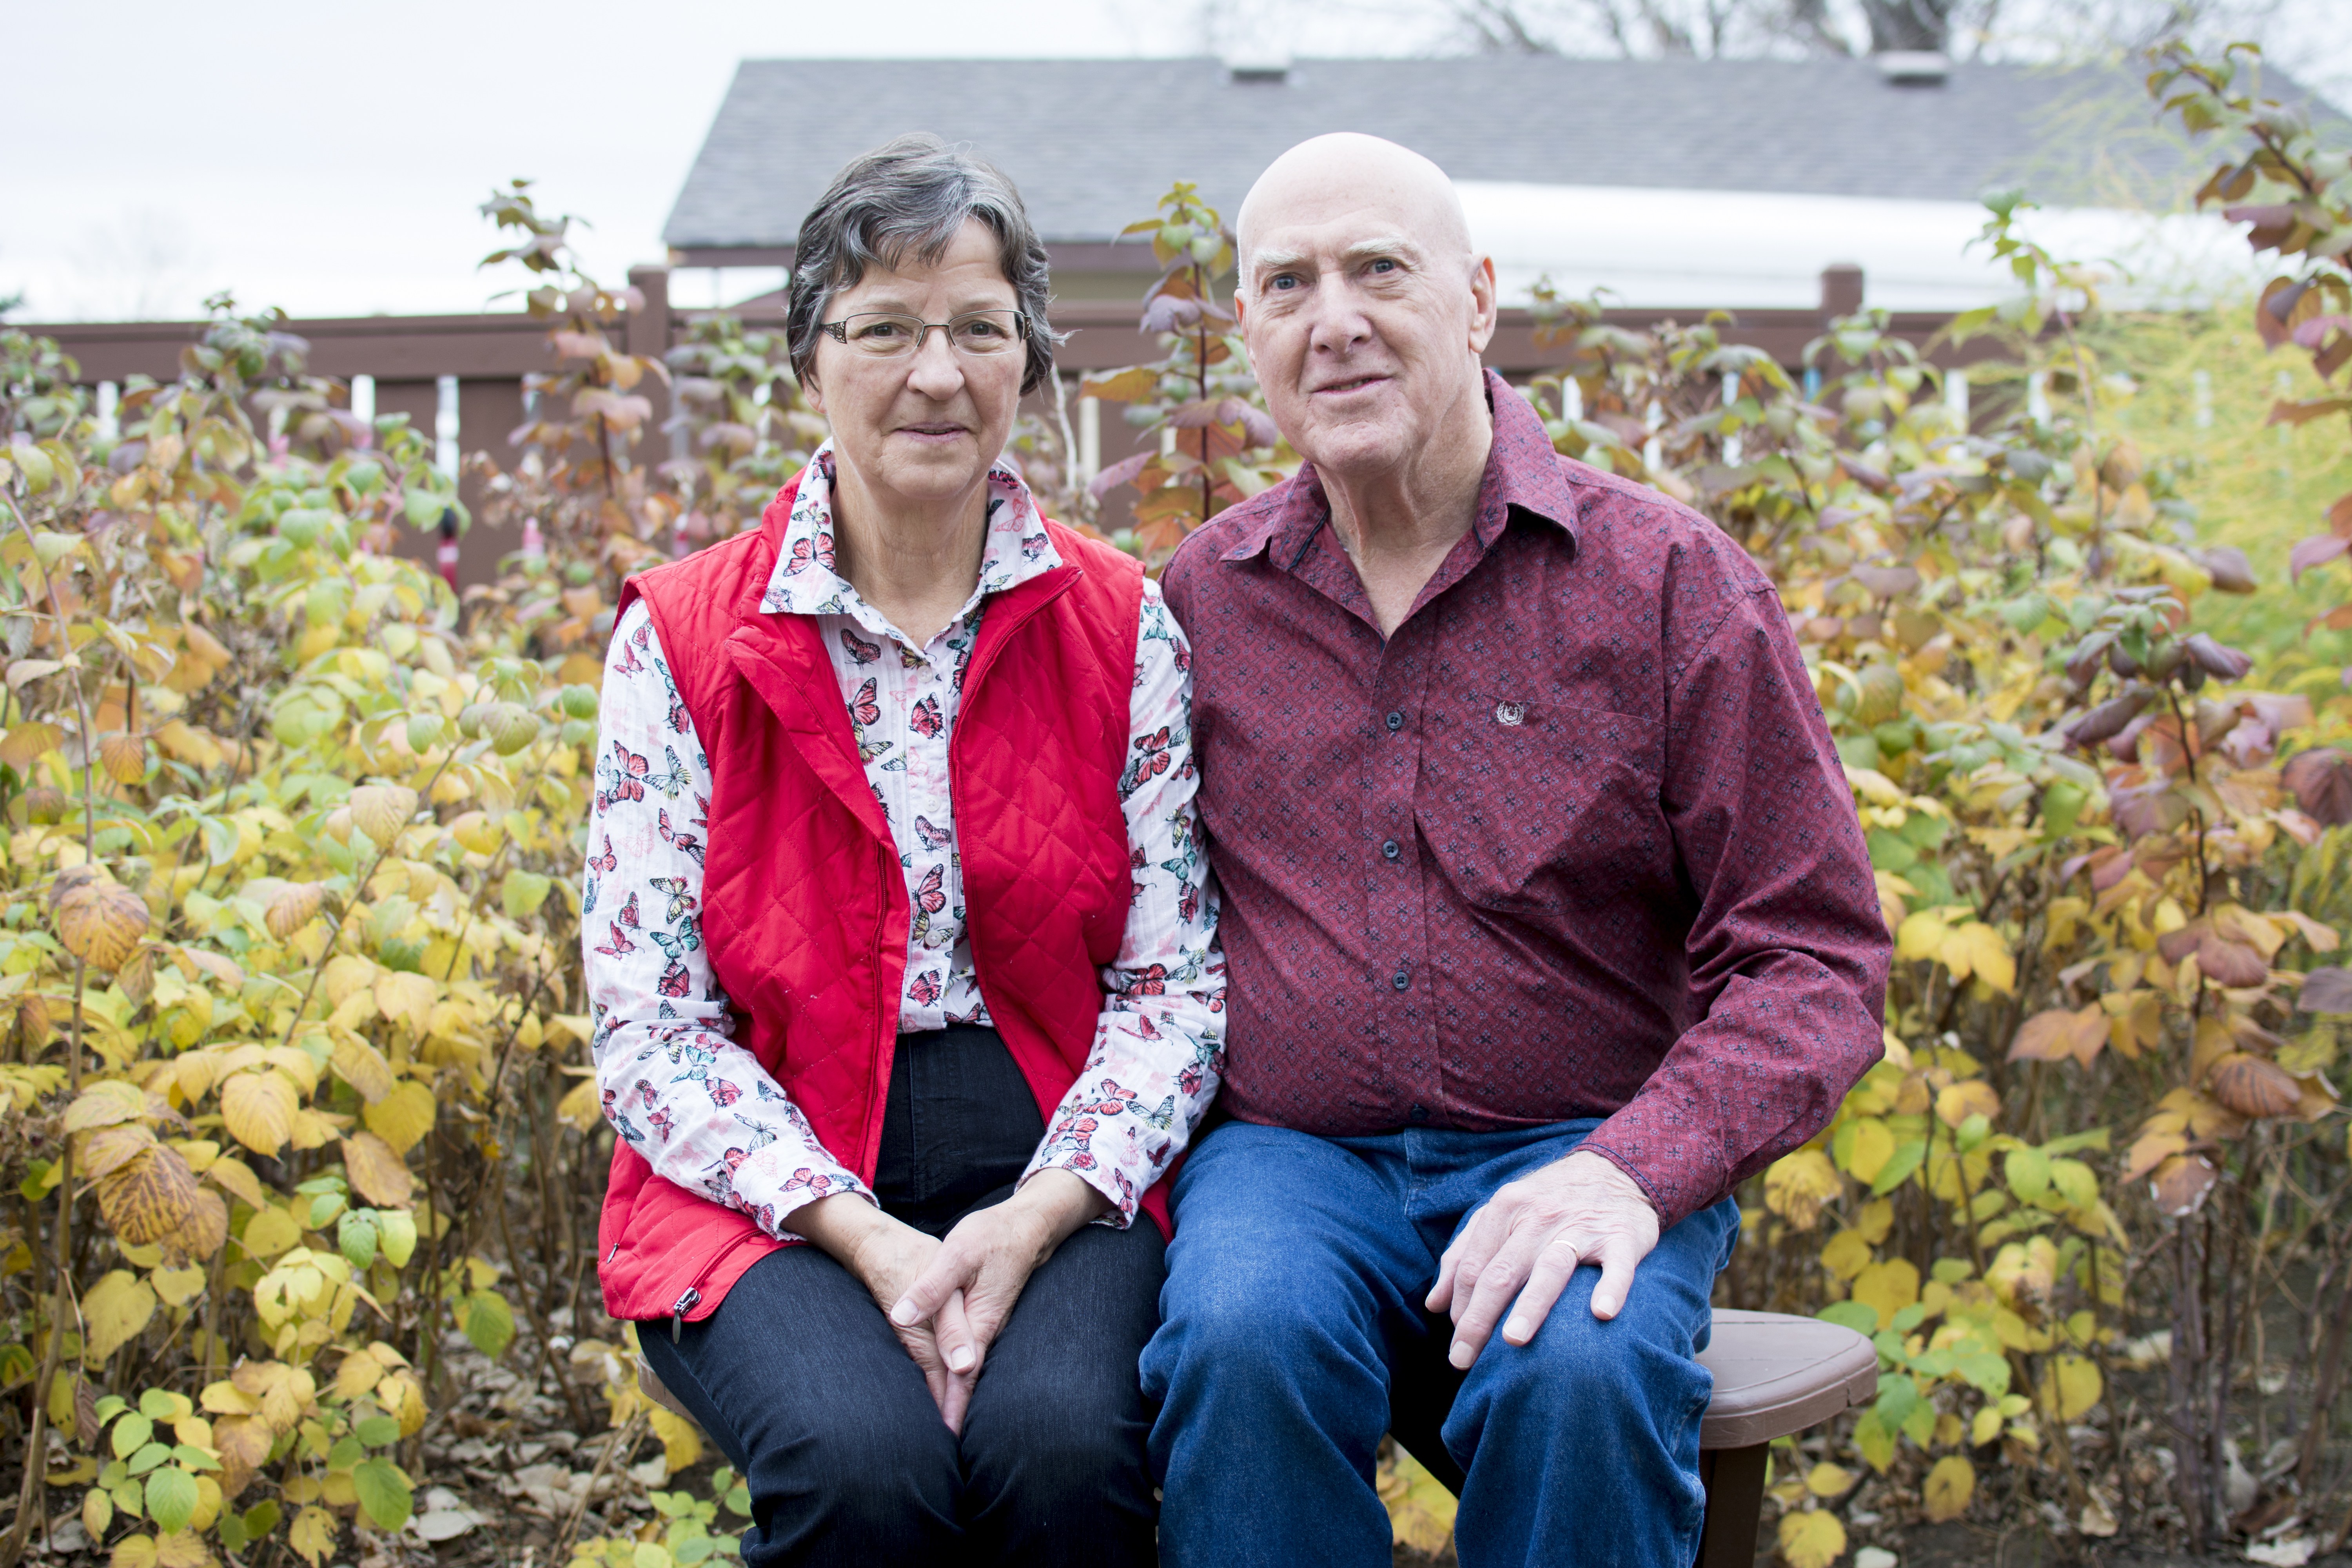 FAMILY SUPPORT – Pictured here are Linda and Ray Baird of Red Deer. With Movember coming up